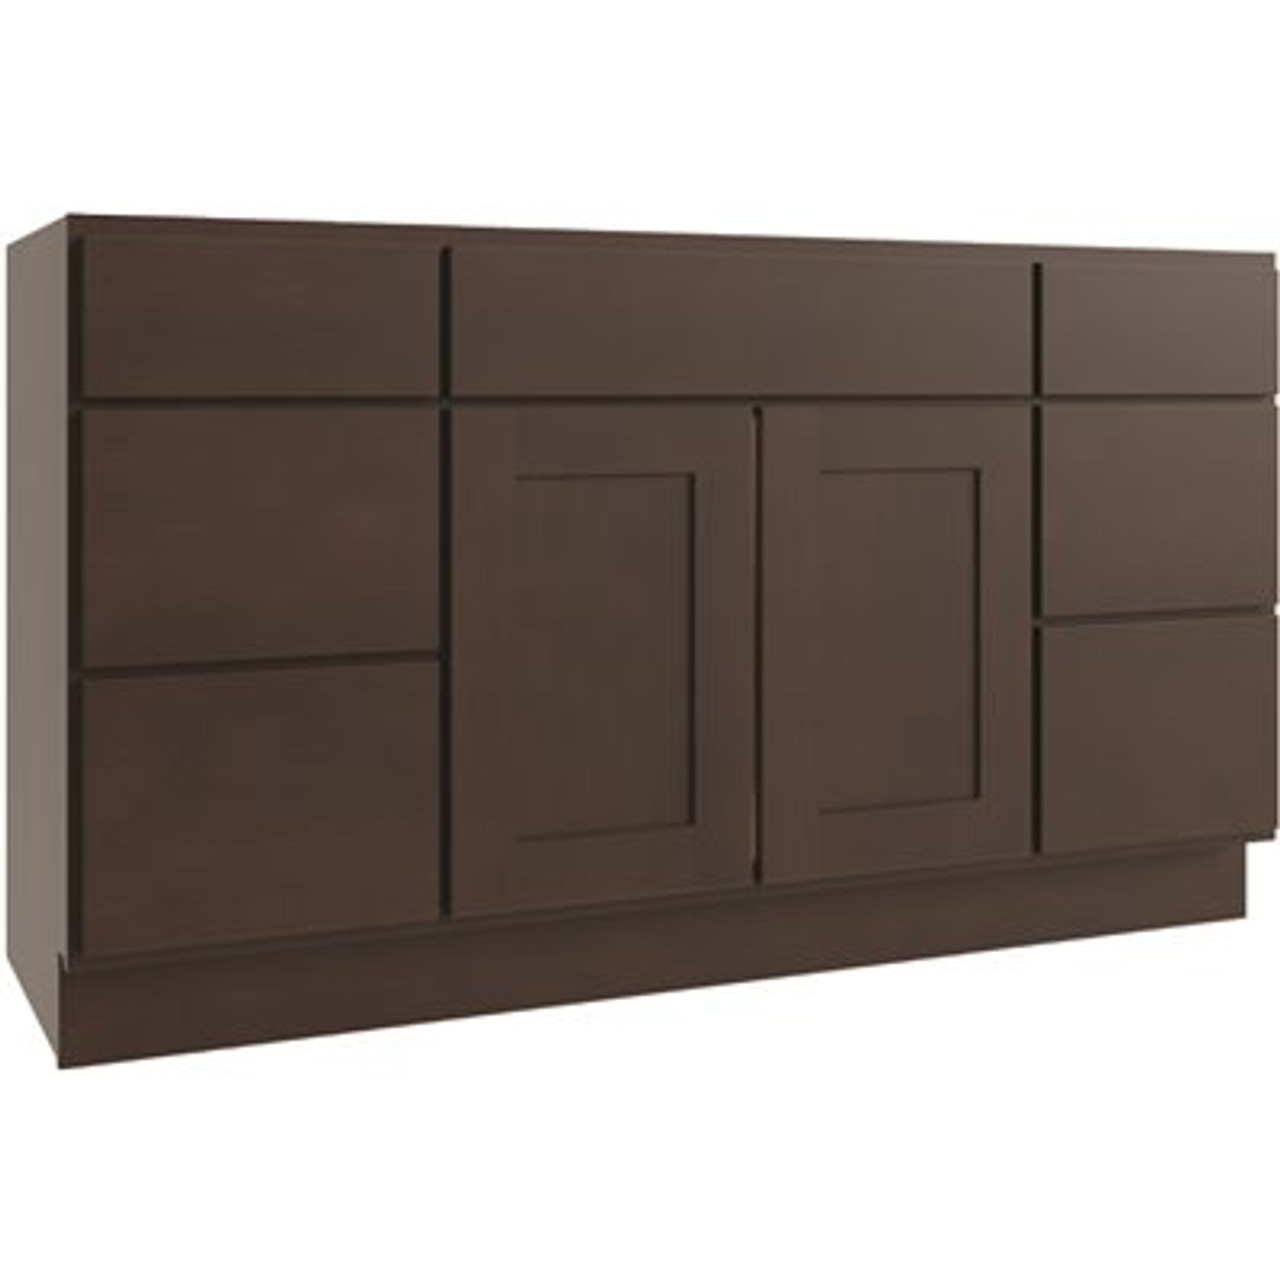 CNC Cabinetry Luxor Vanity Base Cabinet, 60"w X 34.5"h X 21"d, Shaker Espresso